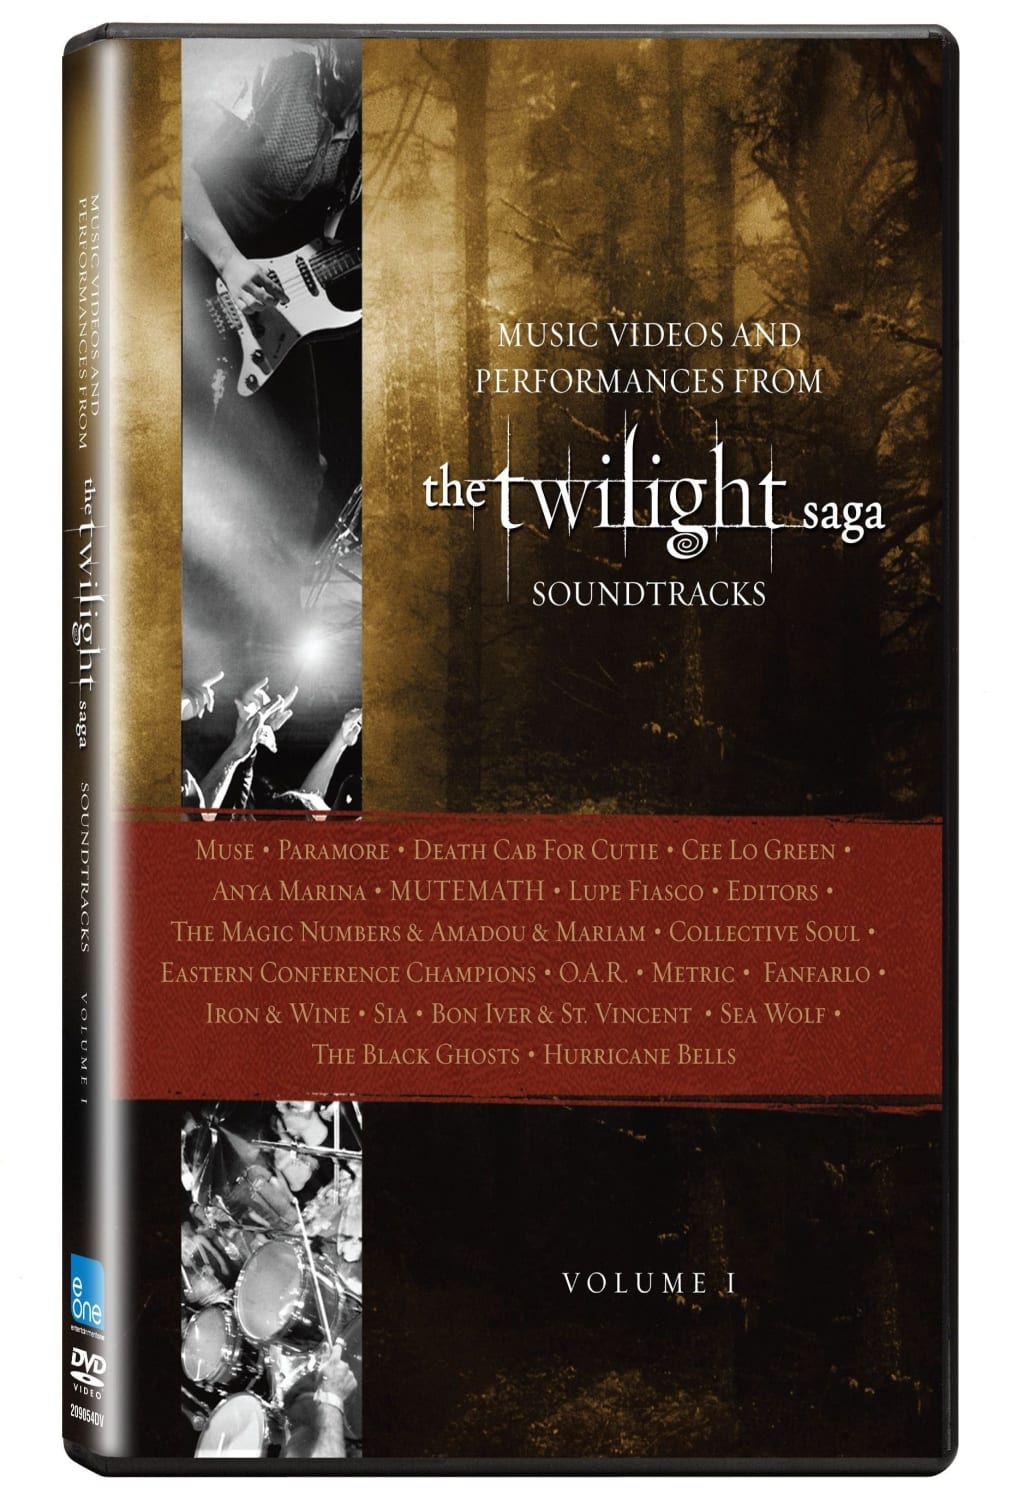 The Twilight Saga: Music Videos and Performances from the Soundtracks, Volume One (DVD)